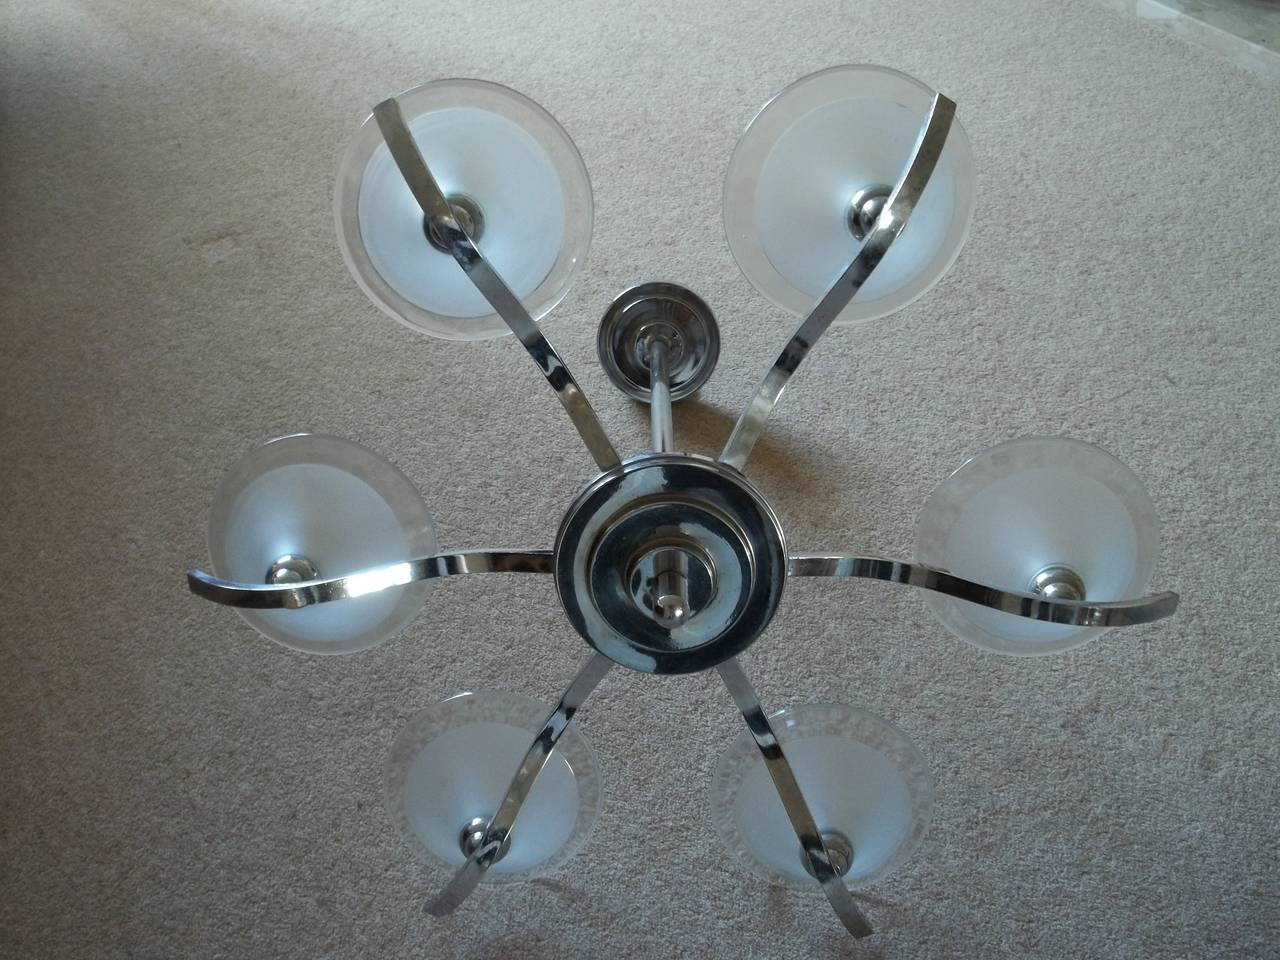 This is a substantial, hanging ceiling light, lamp or chandelier with six branches and beautiful glass conical shades, original to the Art Deco period.

The light is made from chromed metal possibly brass.

It has a central vertical tubular rod